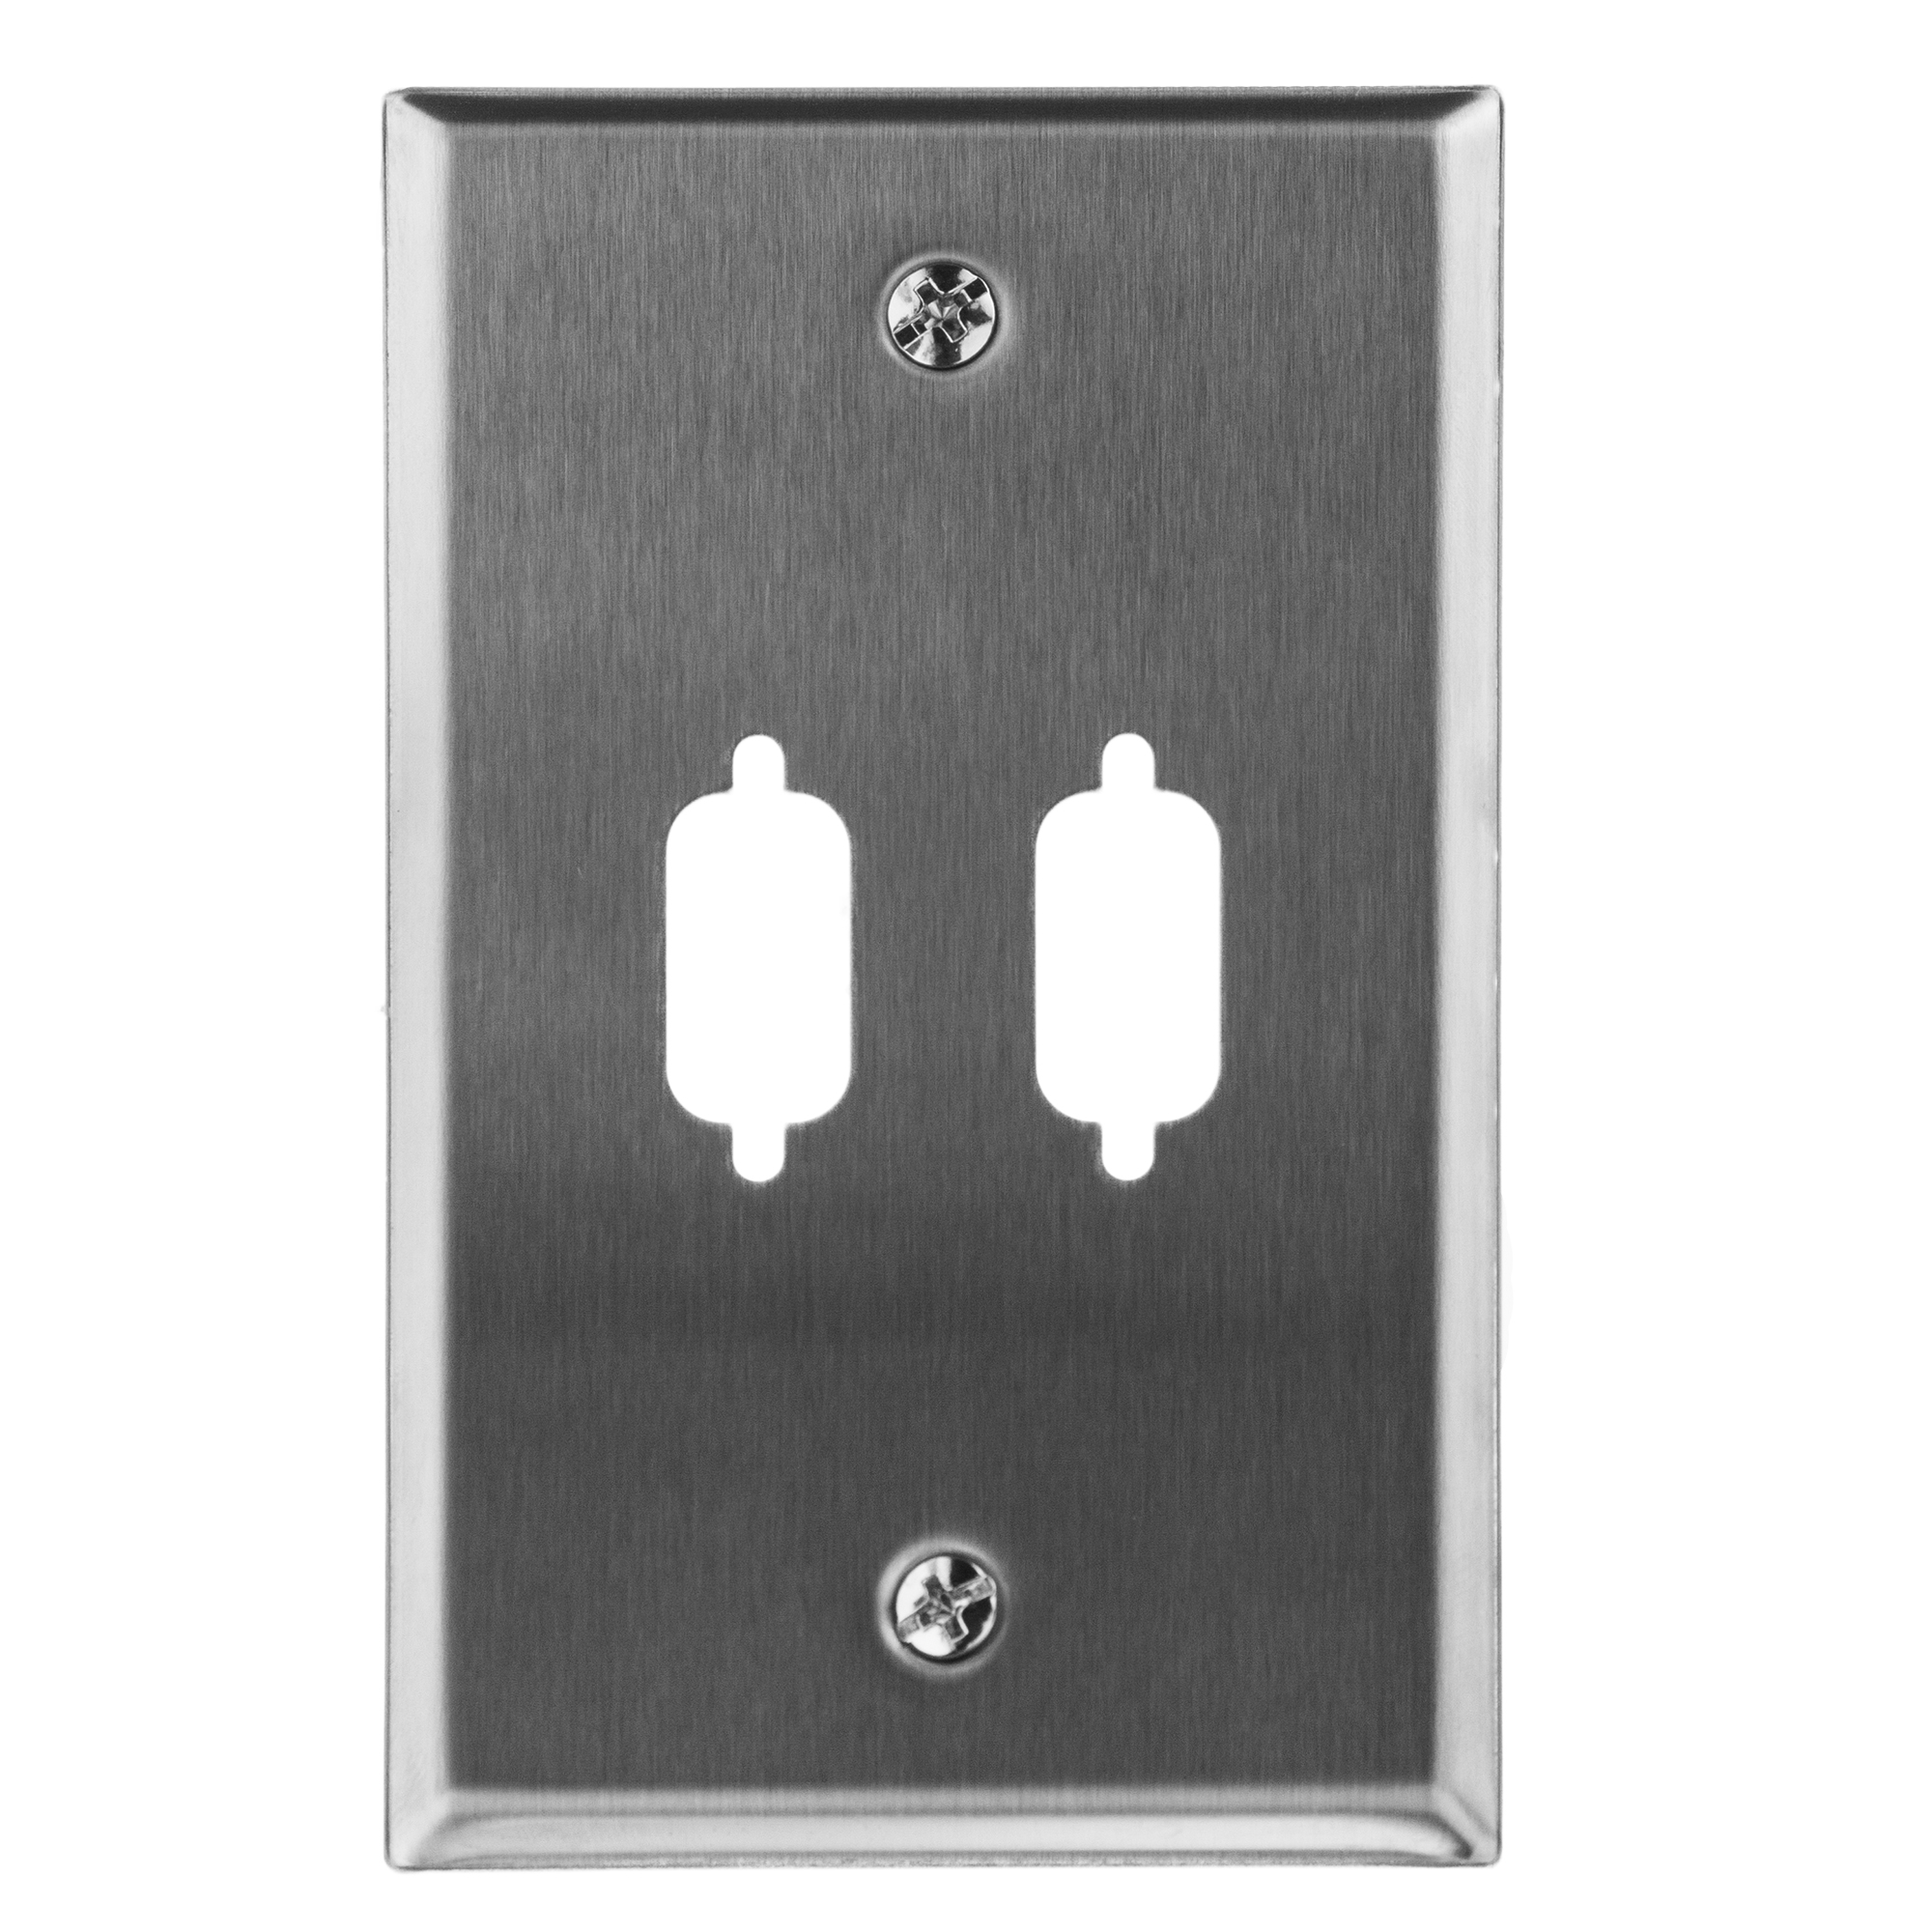 Stainless Steel VGA Wall Plate DB9 or HD15 2-Hole DE9